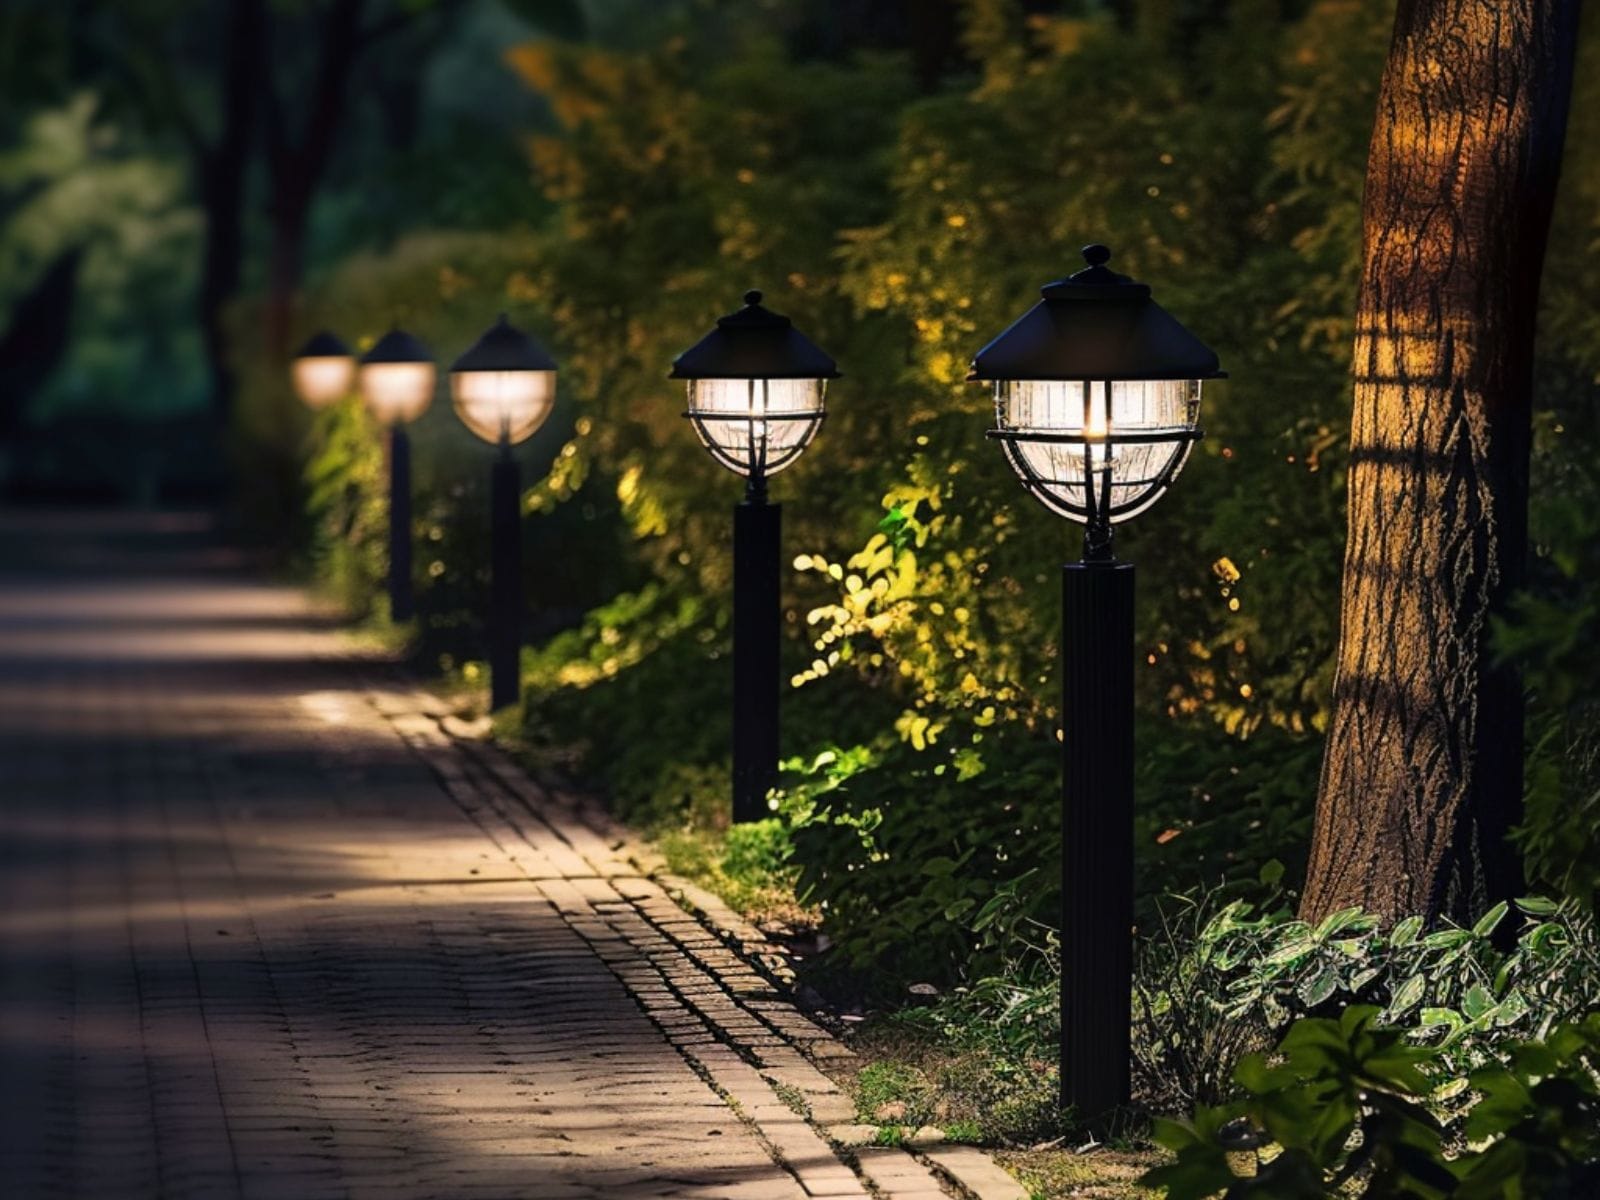 Solar LED lights installed along a yard pathway